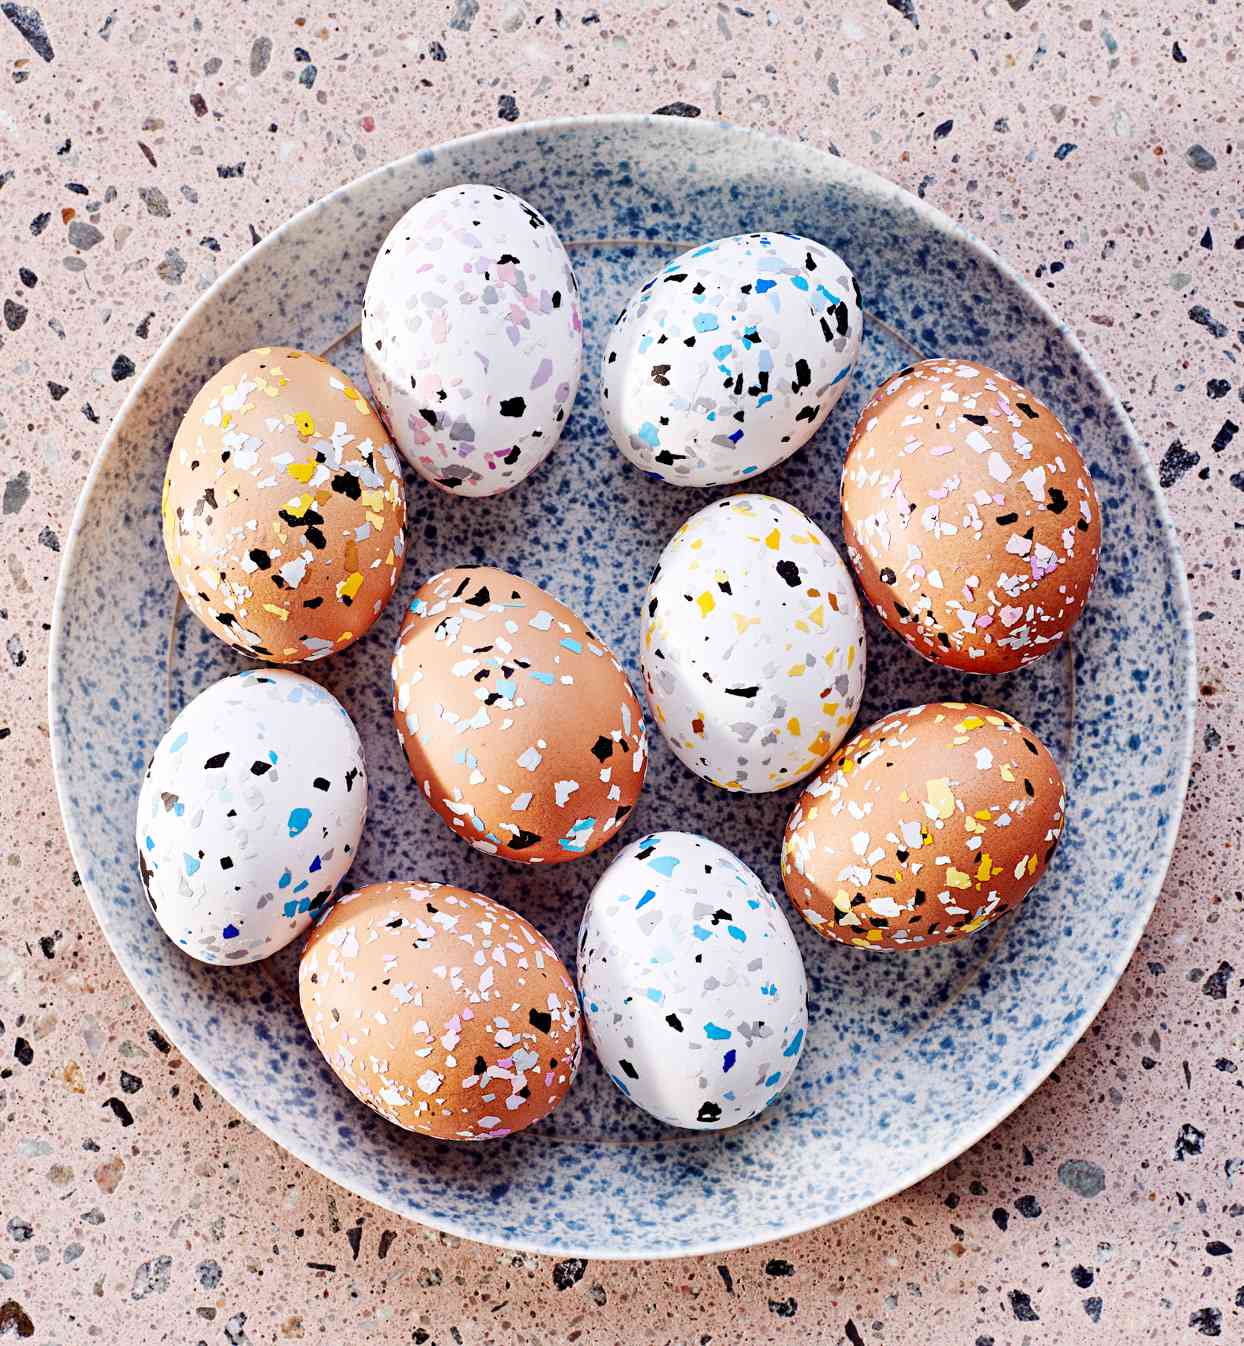 Of our best easter egg decorating ideas and designs